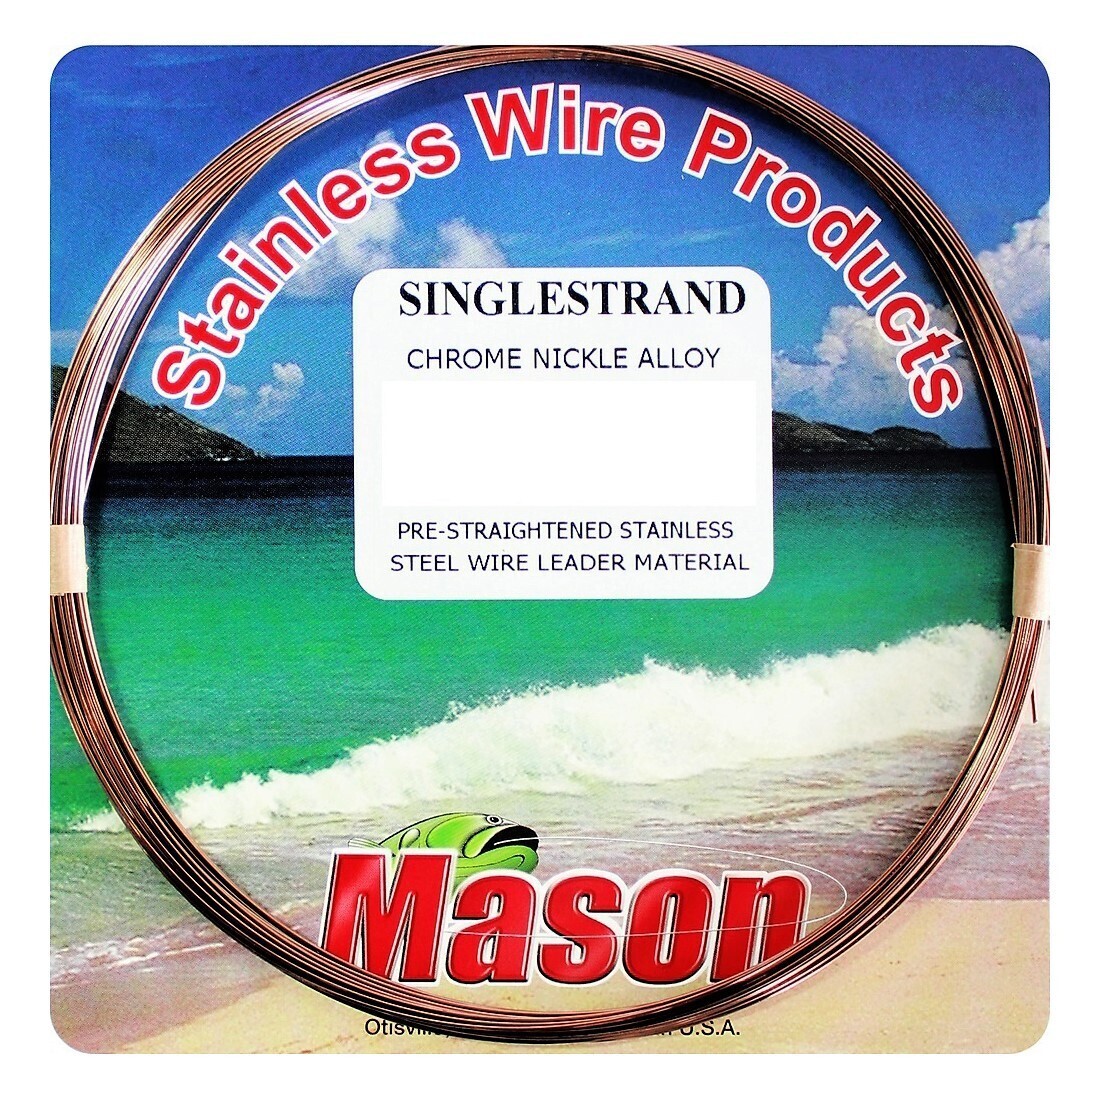 25ft Coil of 58lb Mason Single Strand Stainless Steel Wire Fishing